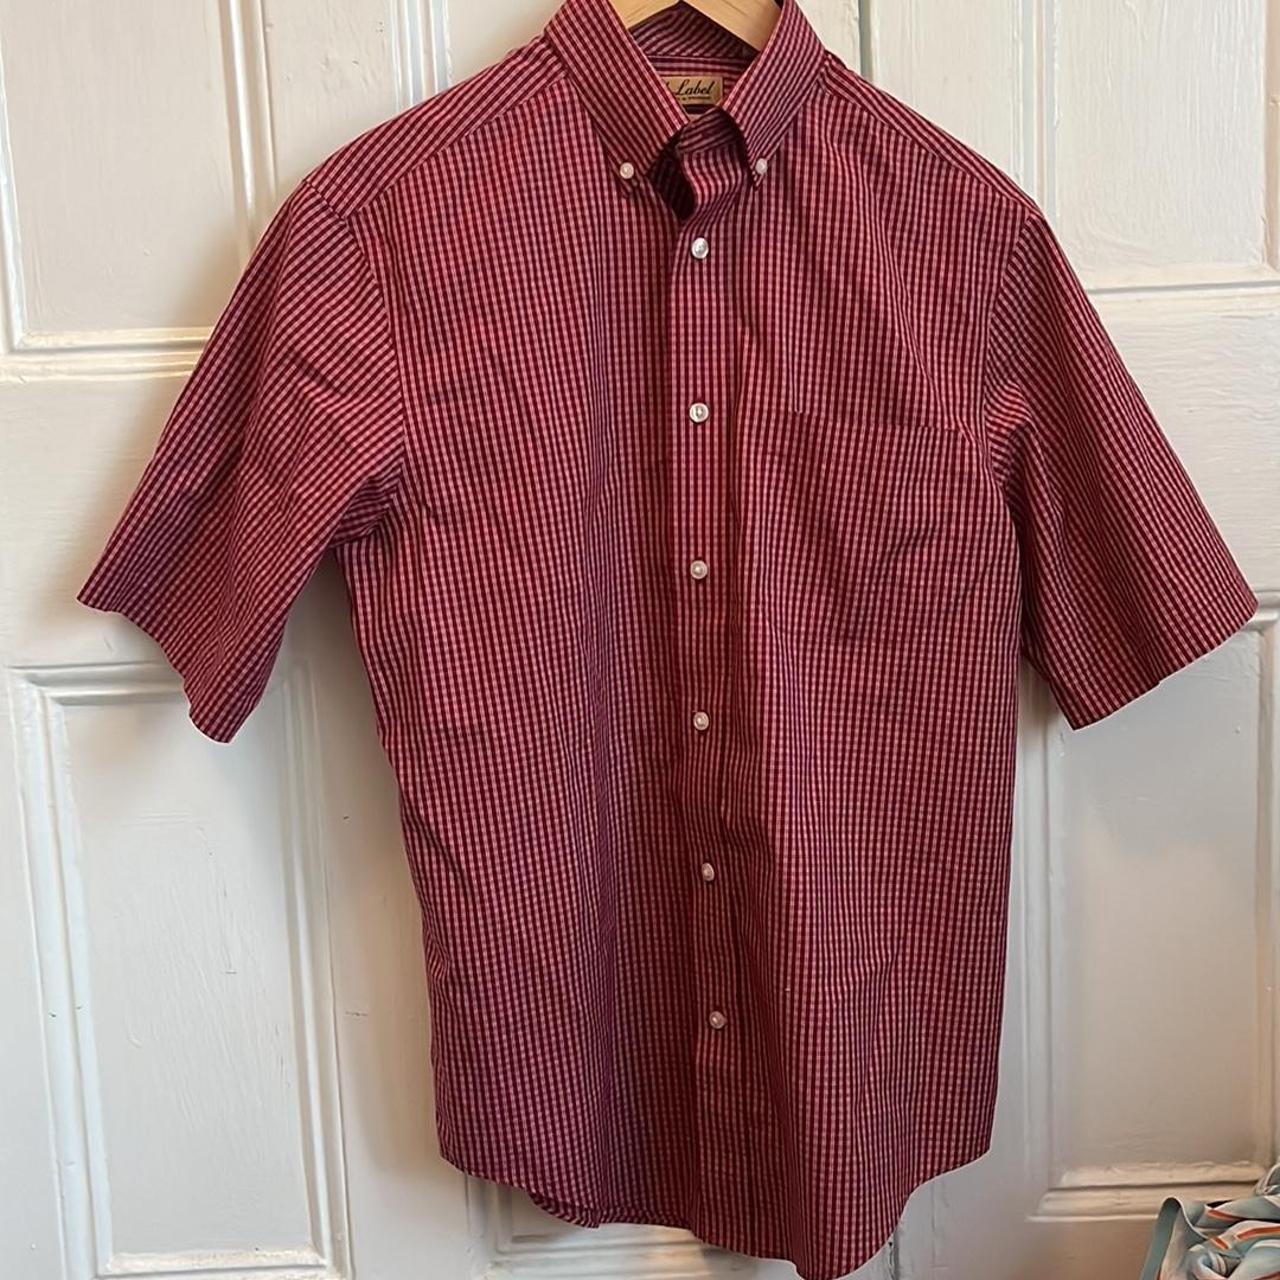 Roundtree & Yorke Men's Red and White Shirt | Depop